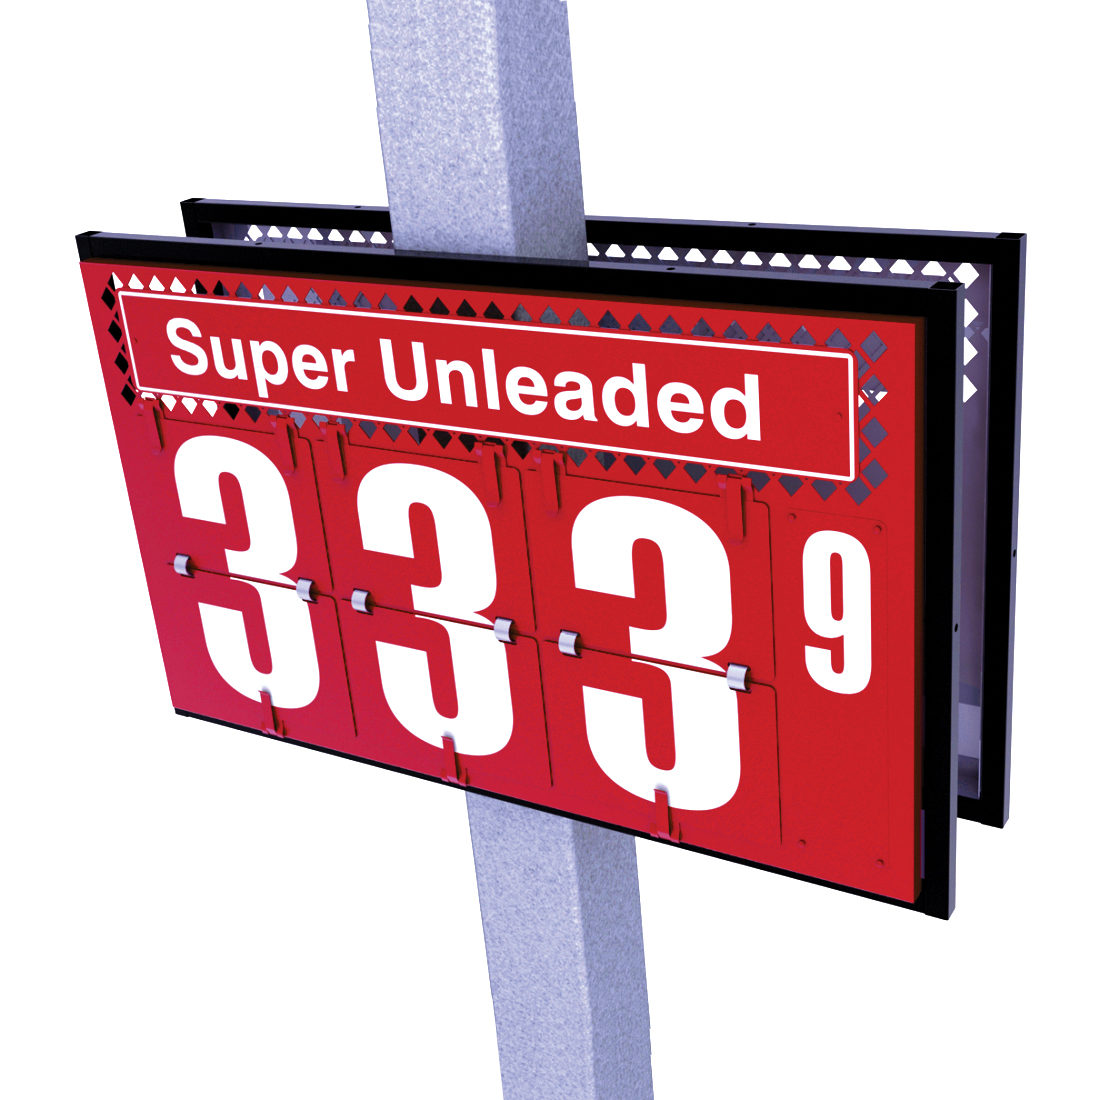 Unleaded Sticker Fuel Sign Petrol Sign Pack of Unleaded Signs Replacement 